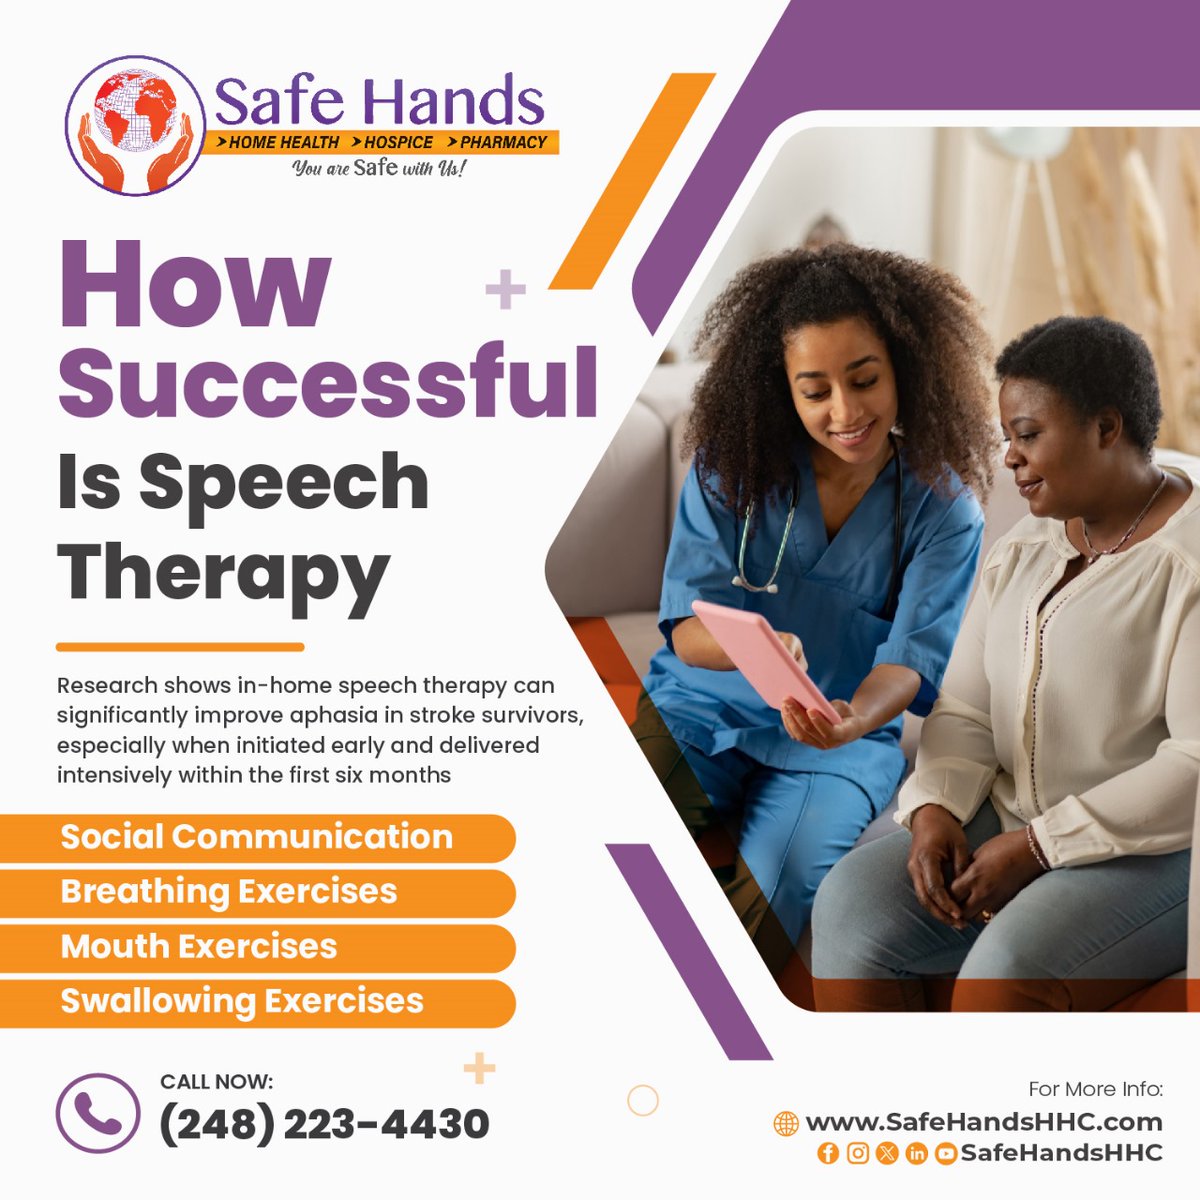 Early action equals clearer communication. 🕒✨ Safe Hands Speech Therapy offers the key to improvement post-stroke, with care that comes to you.

Feel free to contact us now: +1 (248) 223-4430
or
Visit us: safehandshhc.com

#SafeHandsHHC #Michigan #earlyintervention